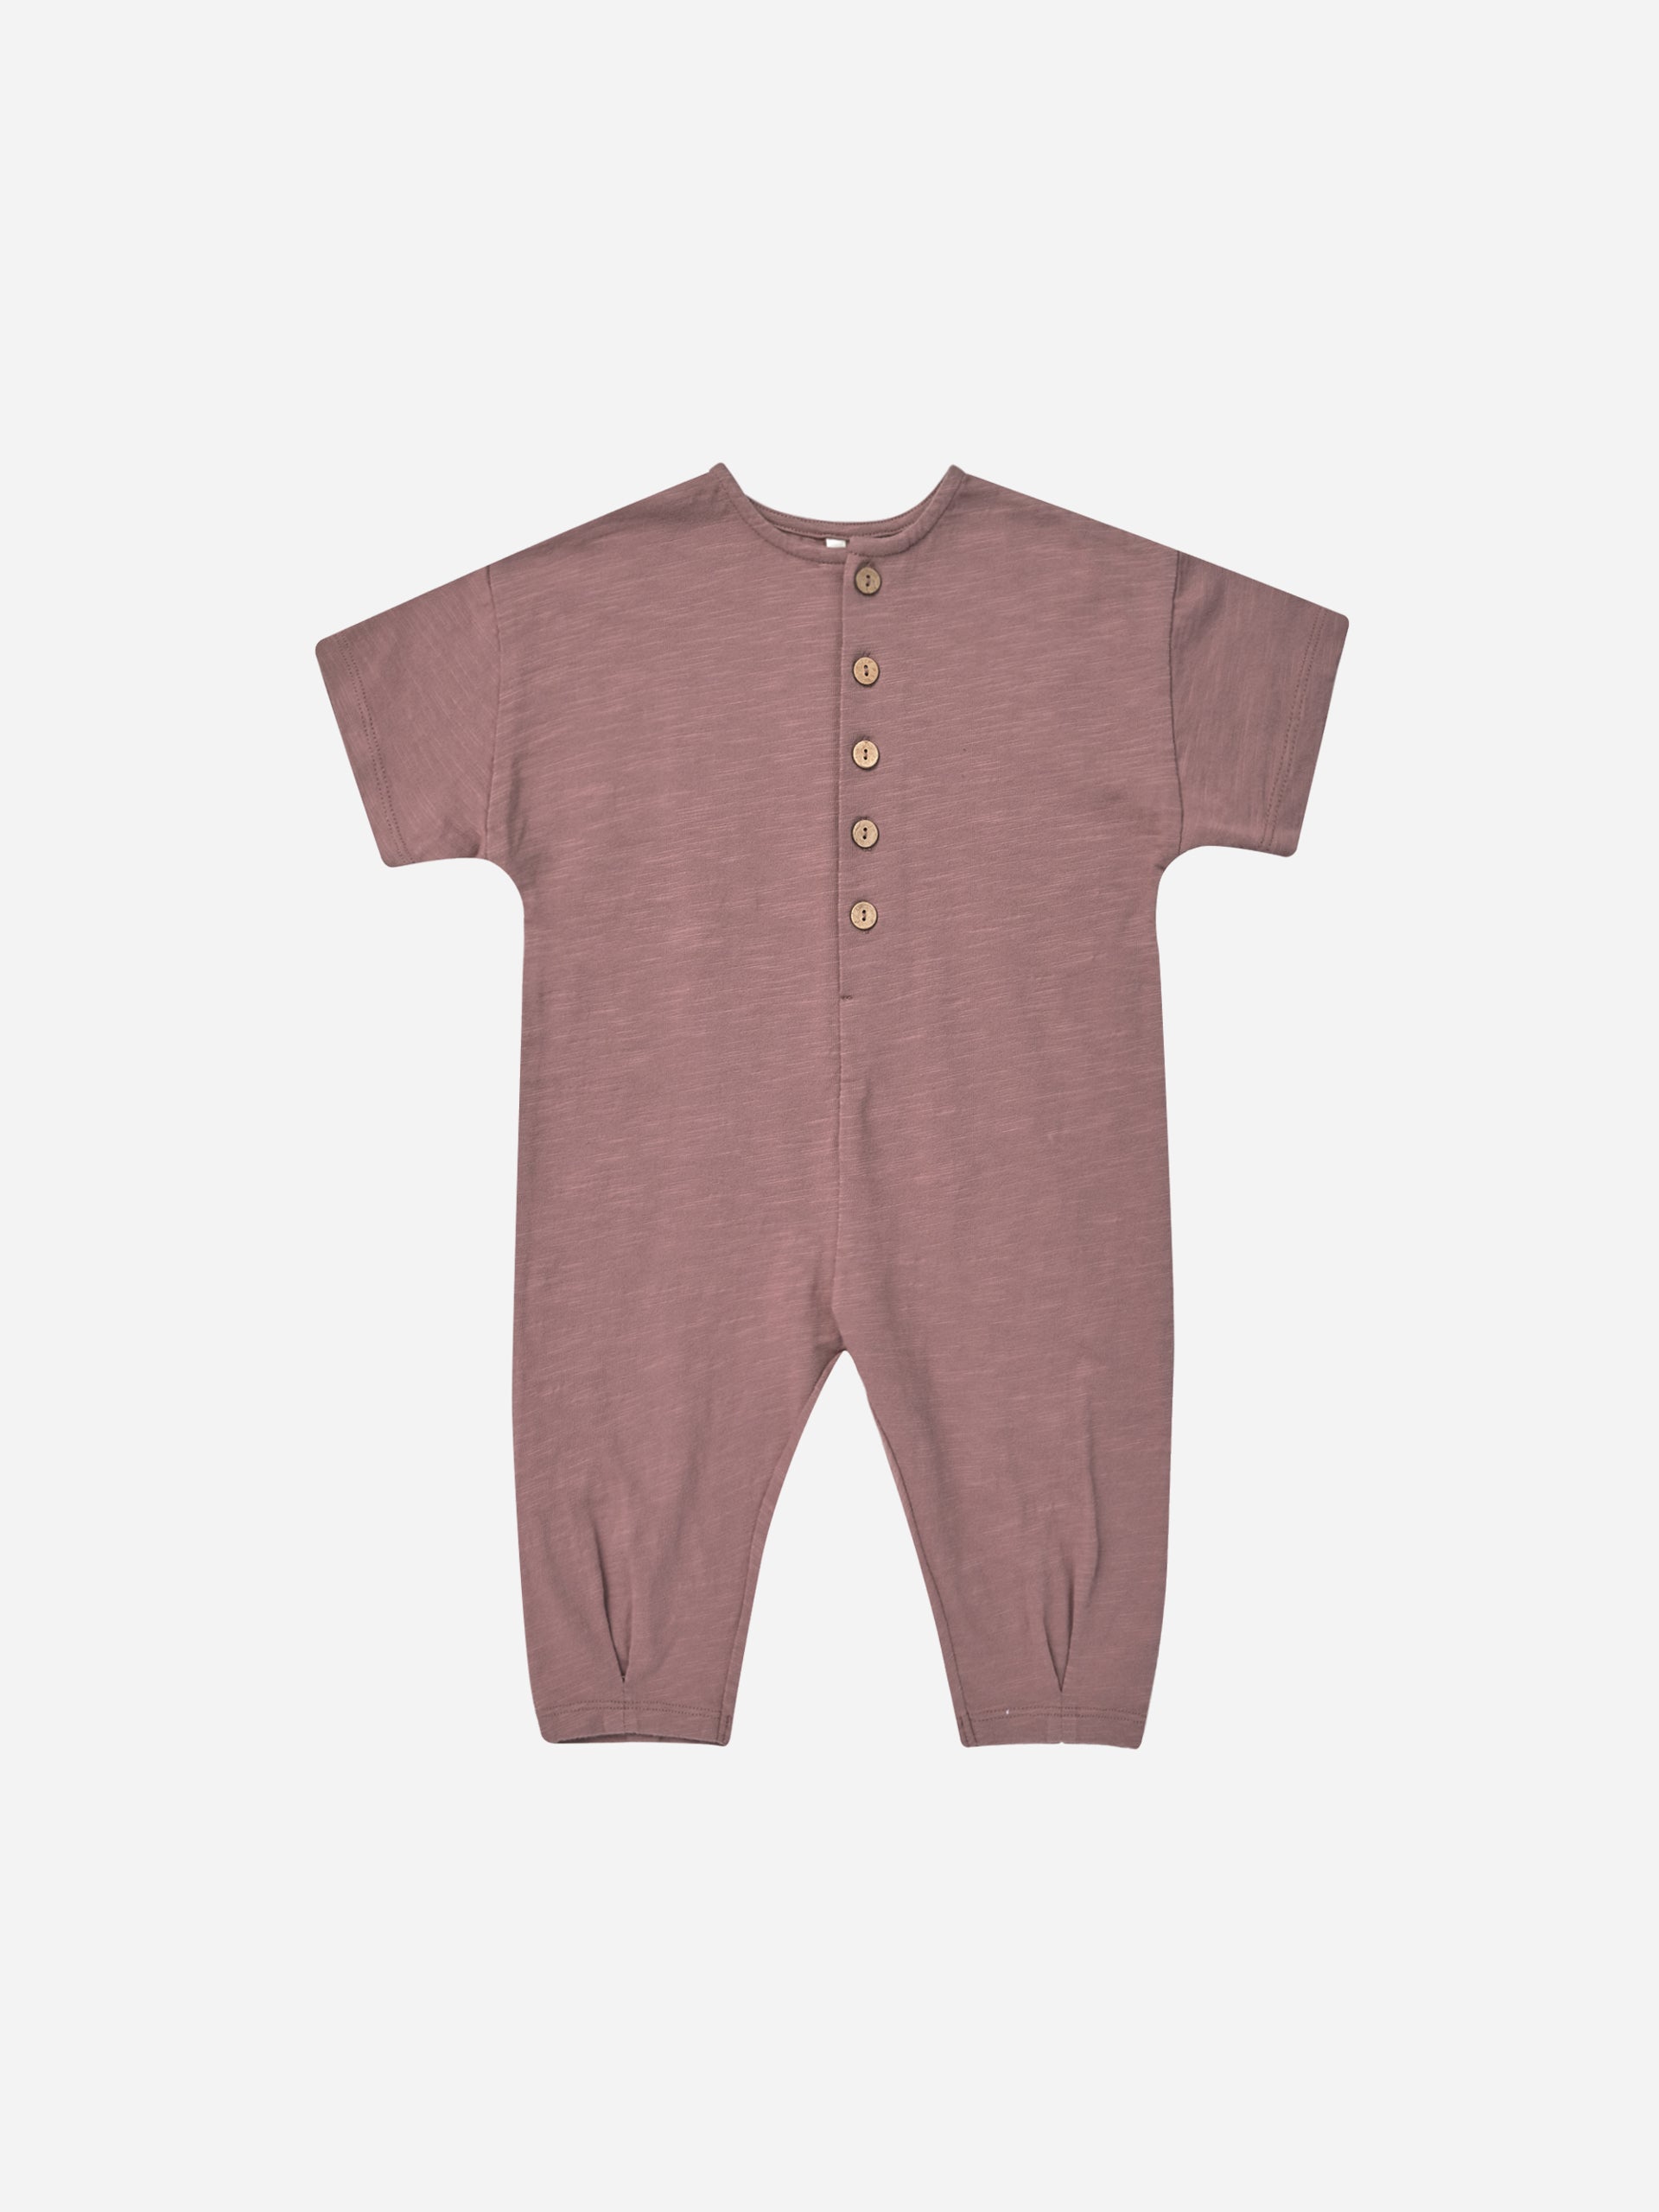 Hayes Jumpsuit || Mulberry - Rylee + Cru | Kids Clothes | Trendy Baby Clothes | Modern Infant Outfits |